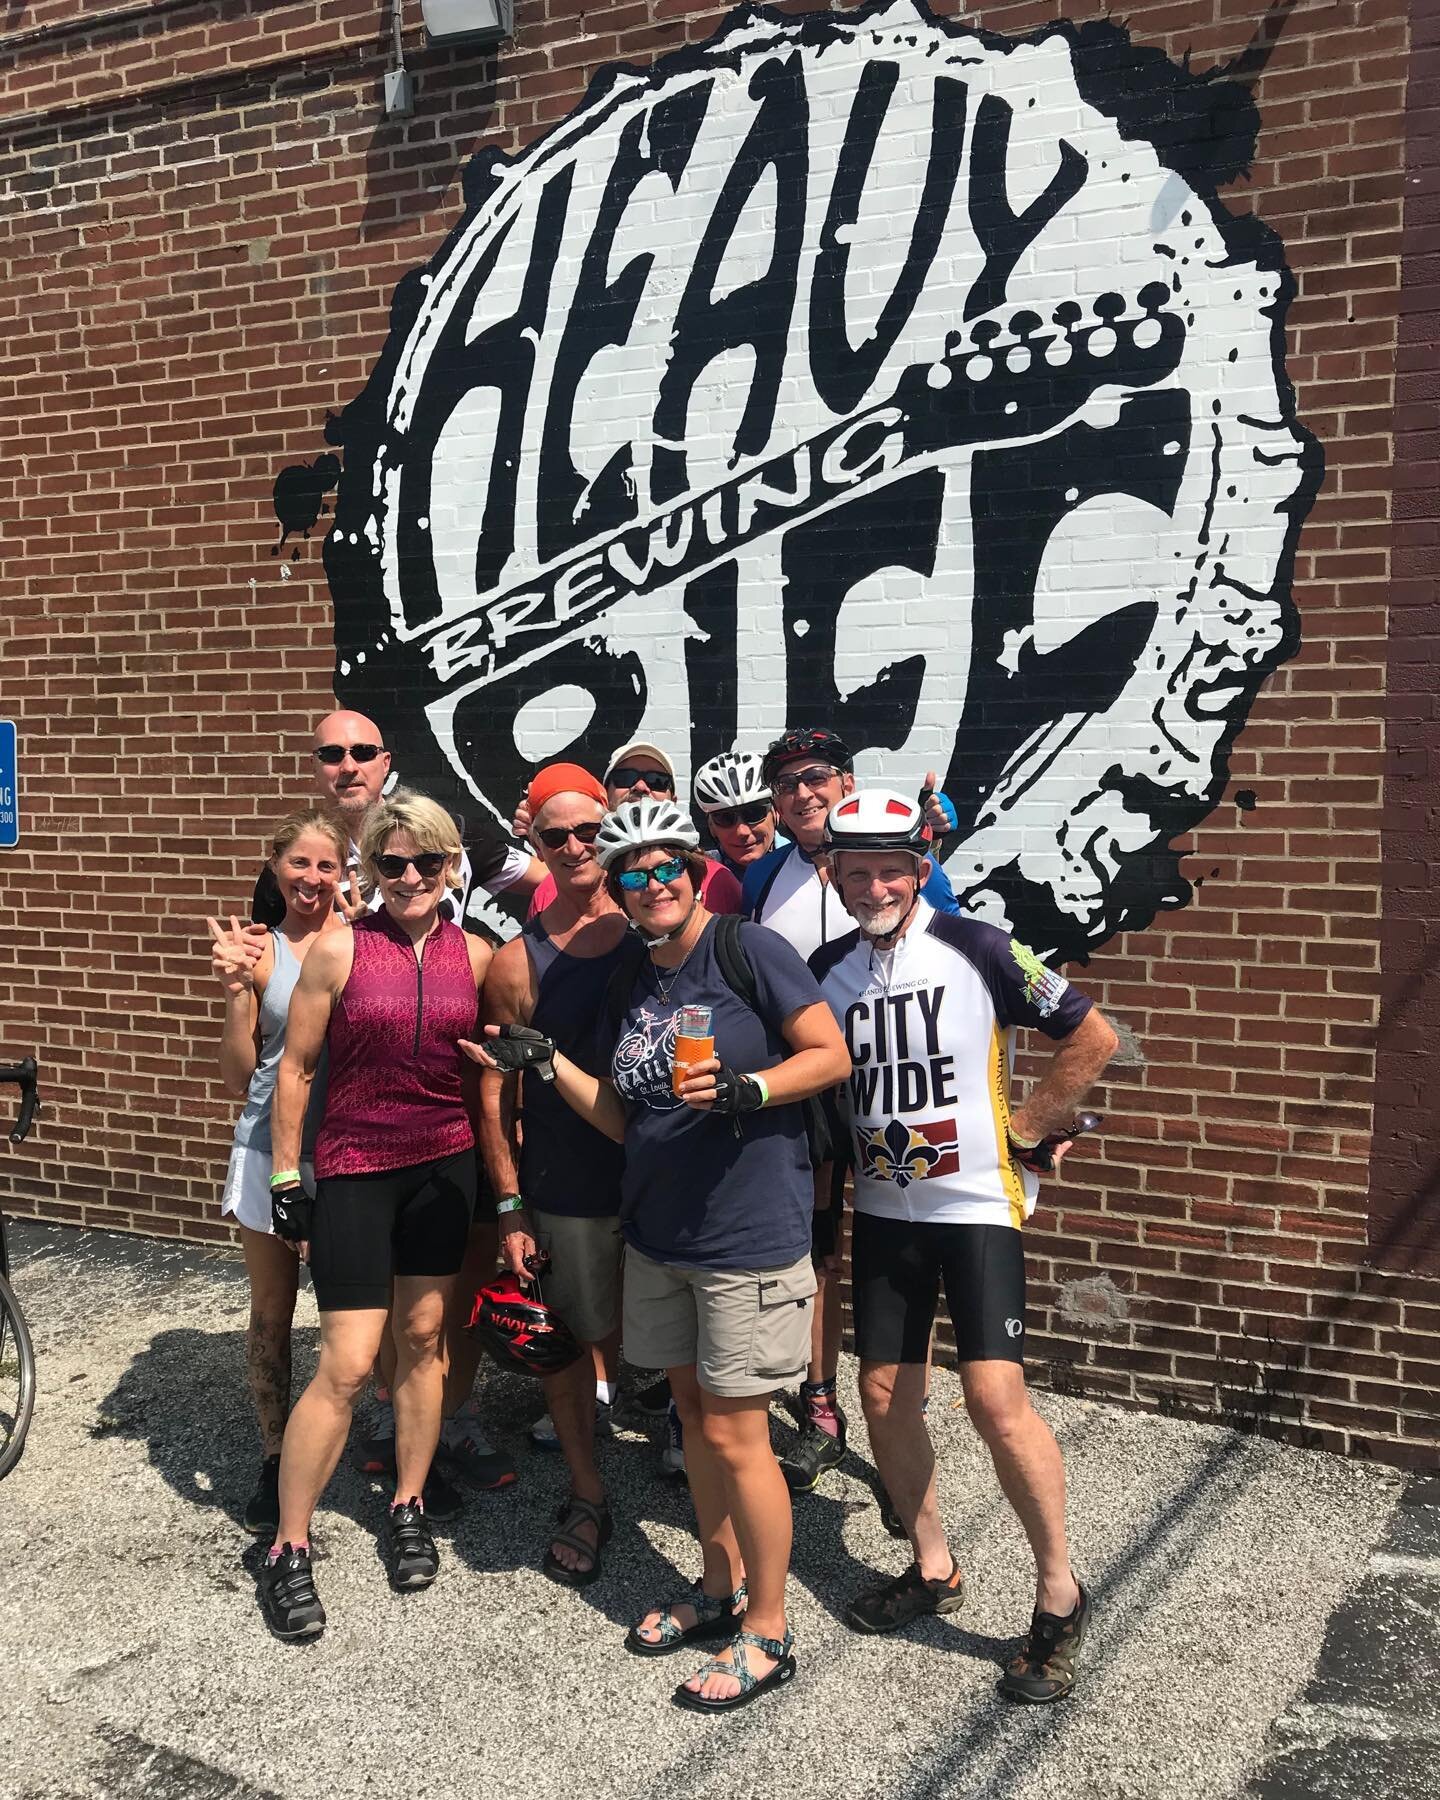 Sign we painted for Heavy Riff back in 2015 or so. Always looks better with people in front! 

#stlsignandmural #handpainted #heavyriff #brewingcompany #stlouis #missouri #mural #sign #cyclists #brewery #dogdown #stl